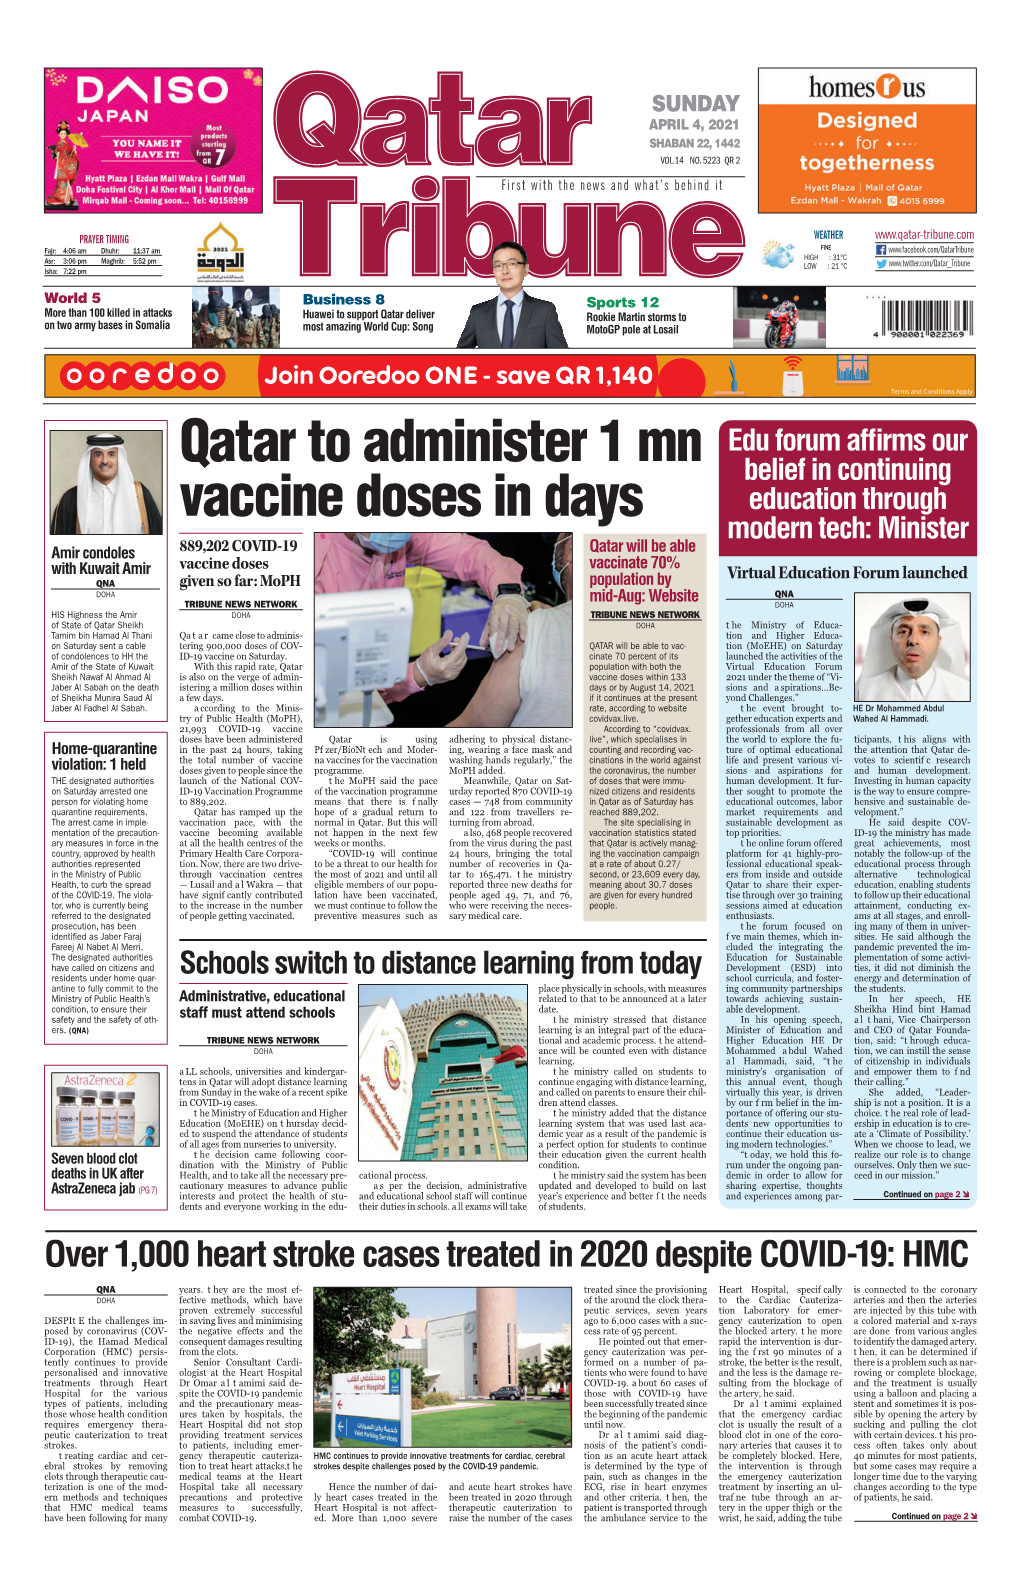 Qatar to Administer 1 Mn Vaccine Doses in Days